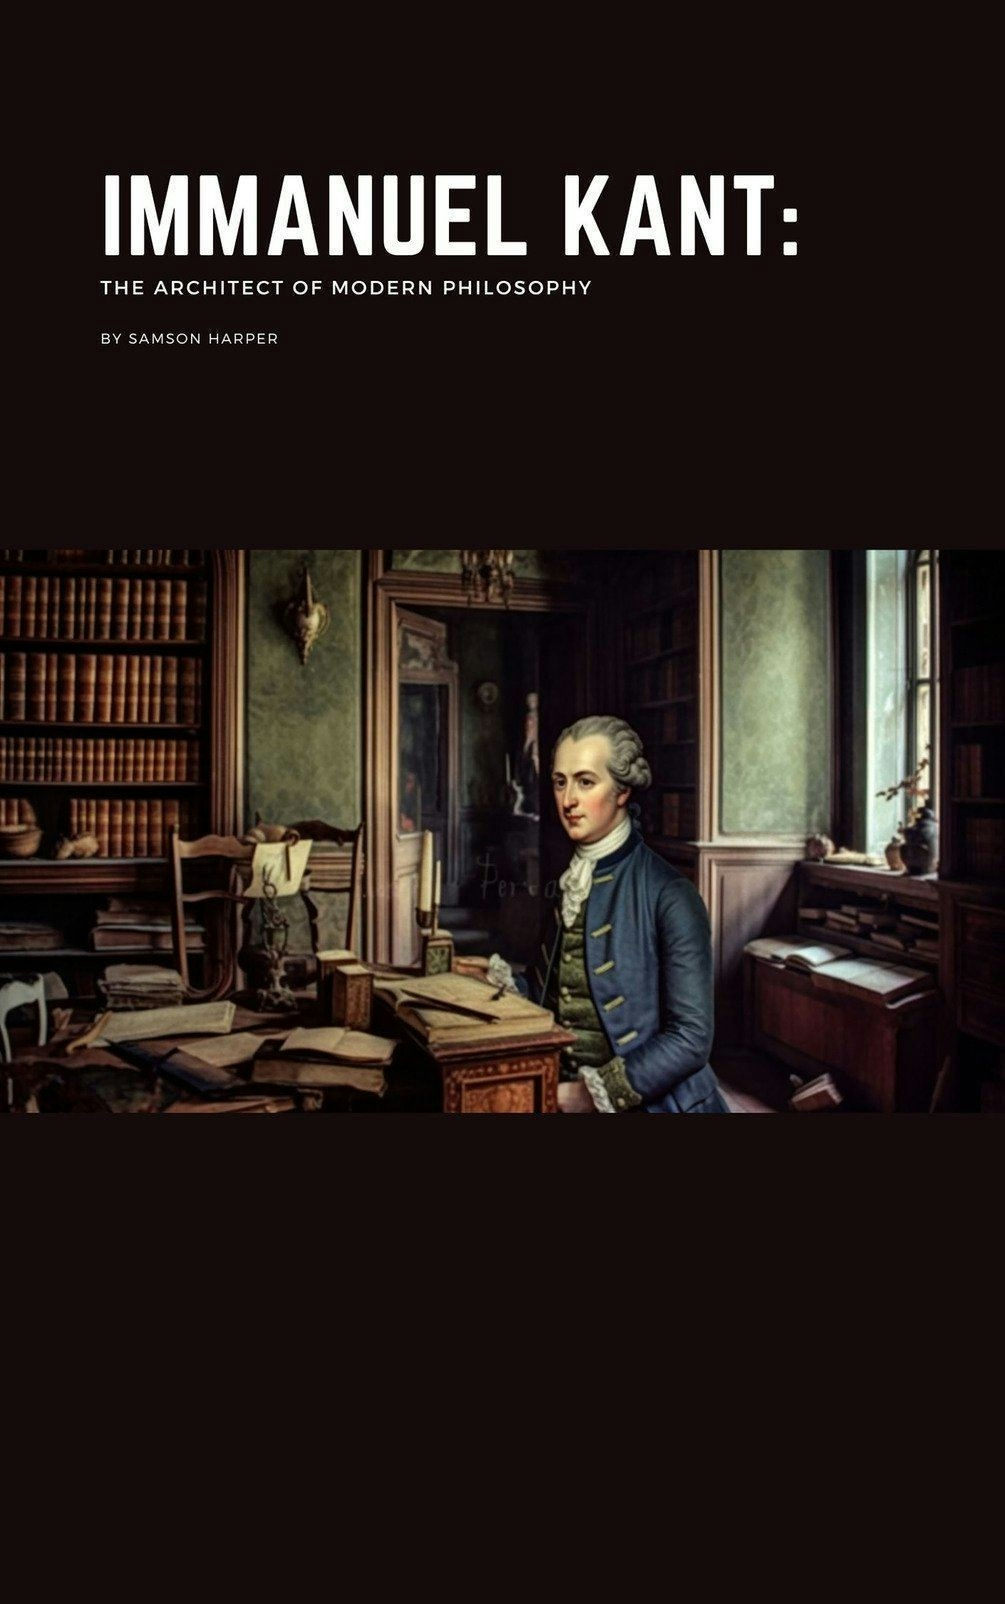 Immanuel Kant: The Architect of Modern Philosophy